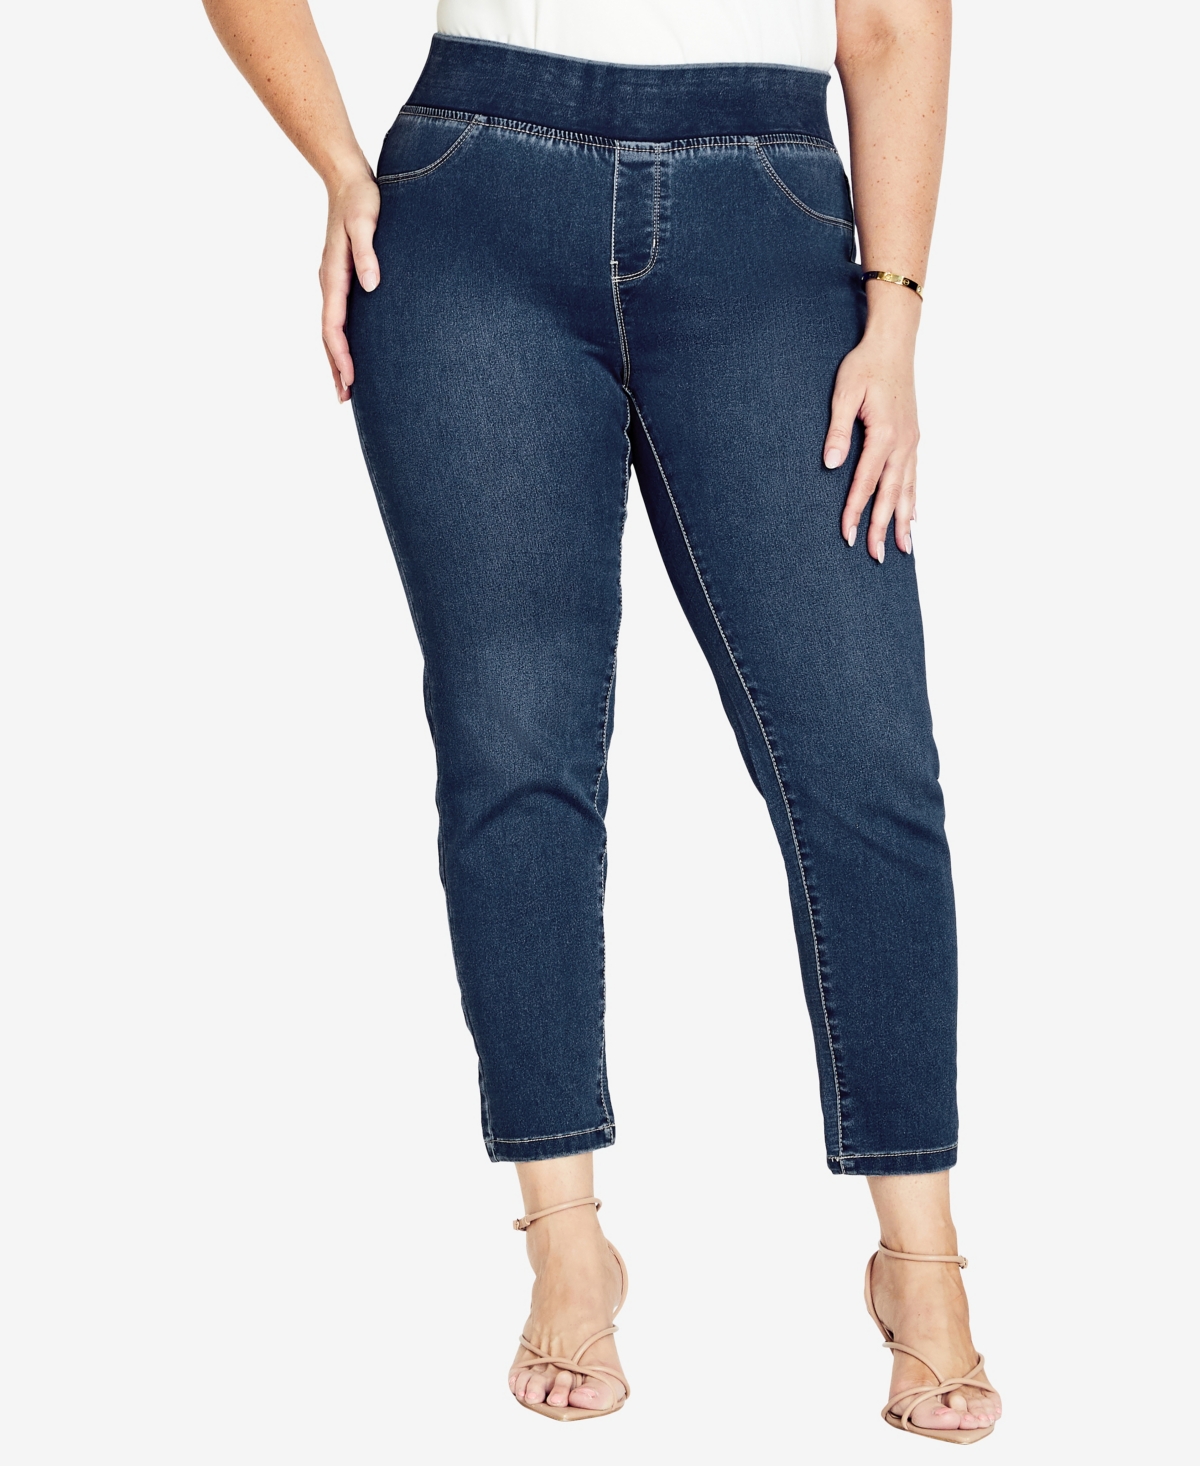 Plus Size Butter Denim Pull On Tall Length Jeans - Medium Wash